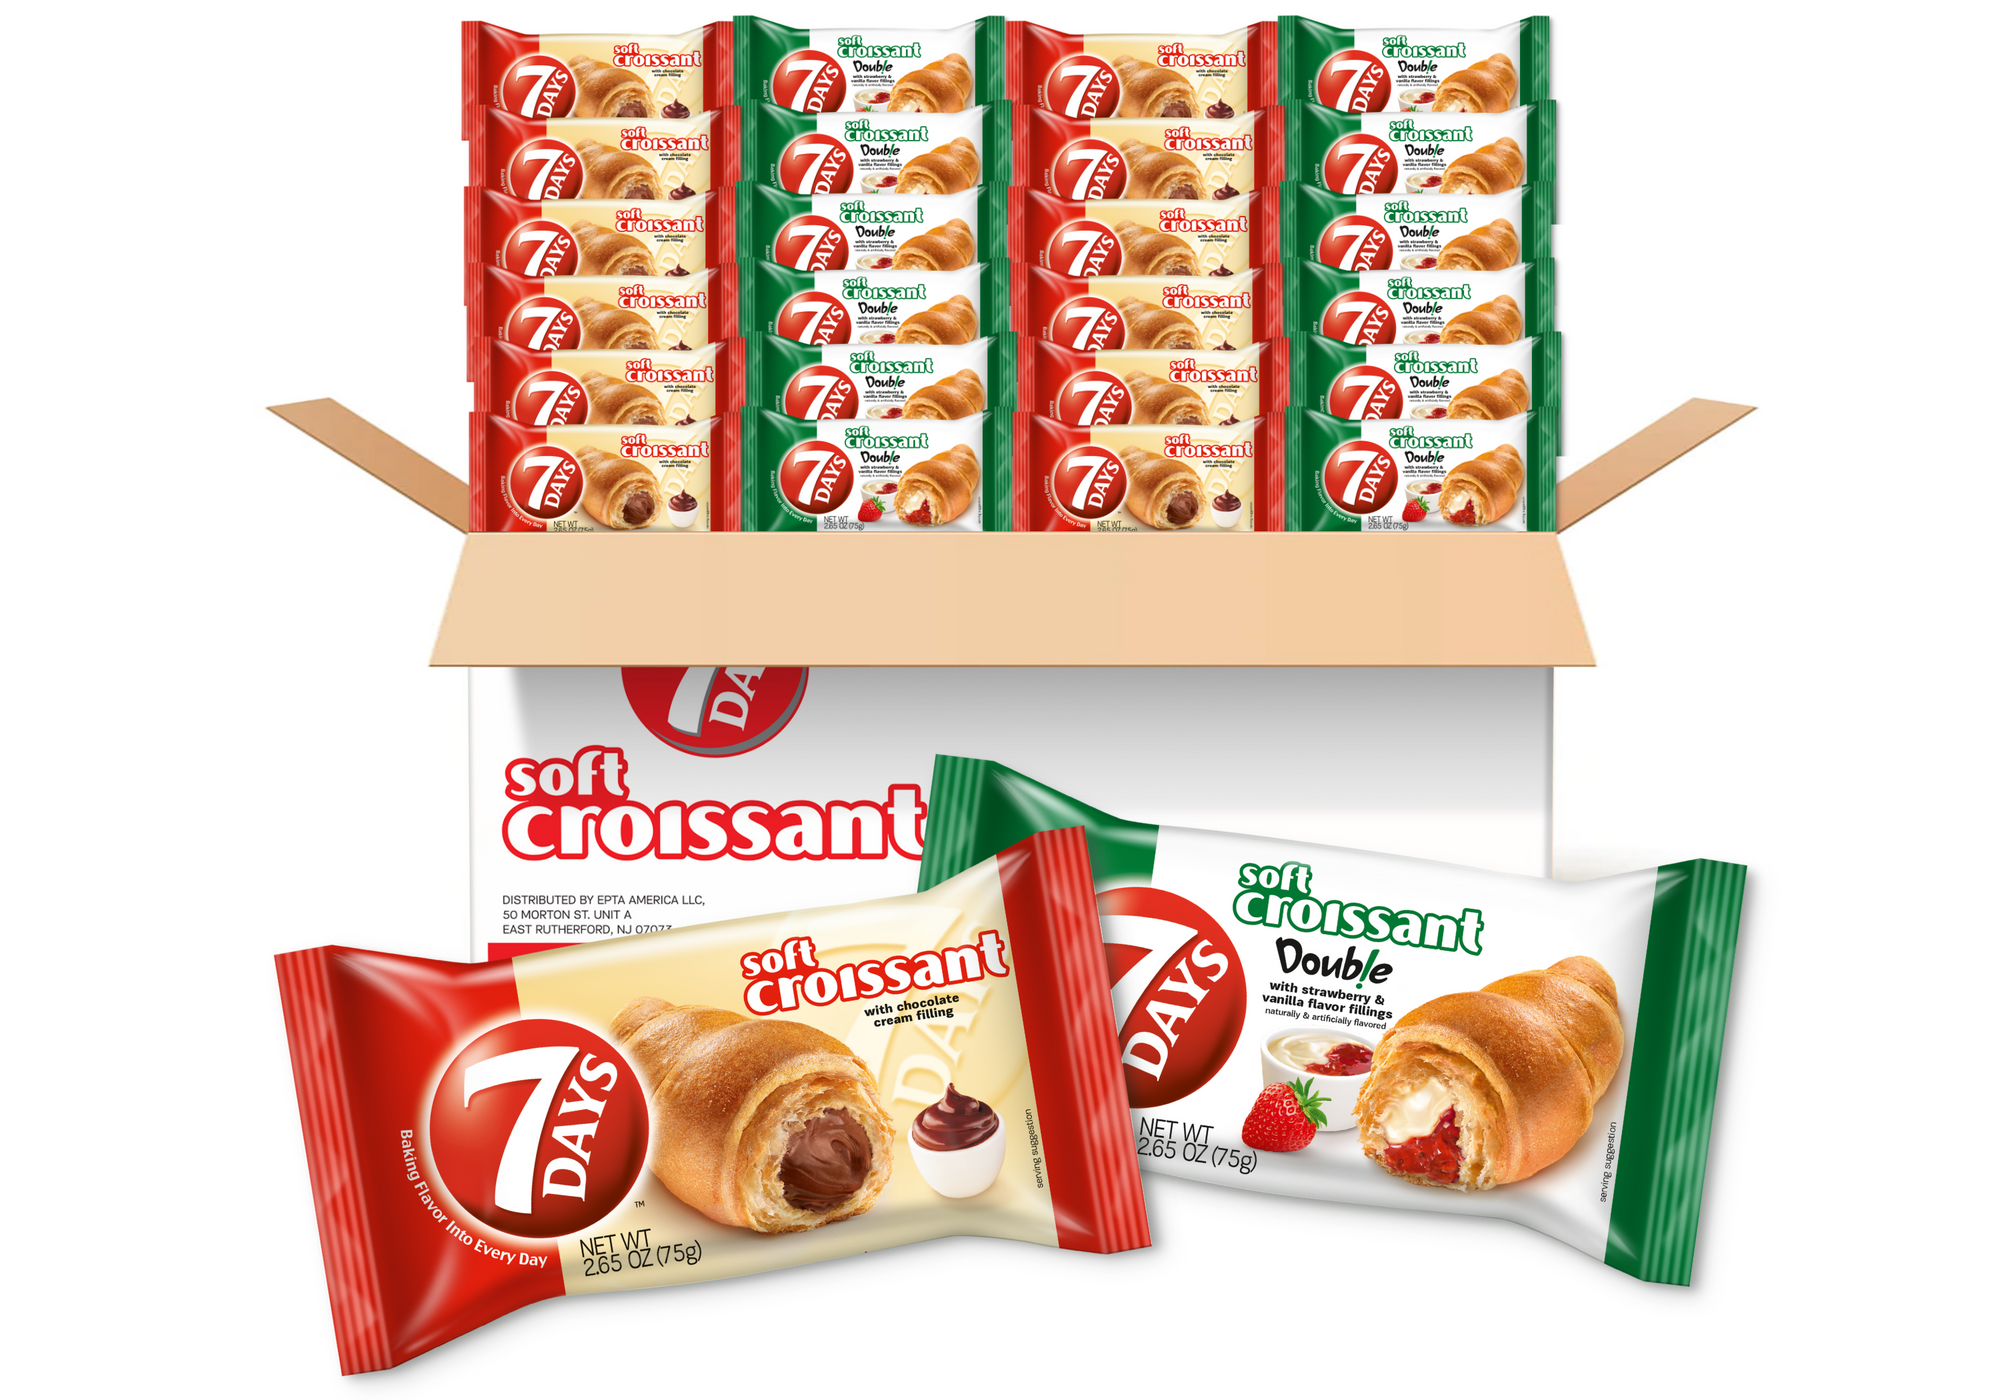 Soft Croissant, 2 Flavor Variety Pack: 12 Chocolate, 12 Strawberry Vanilla (2.65oz, Pack of 24)